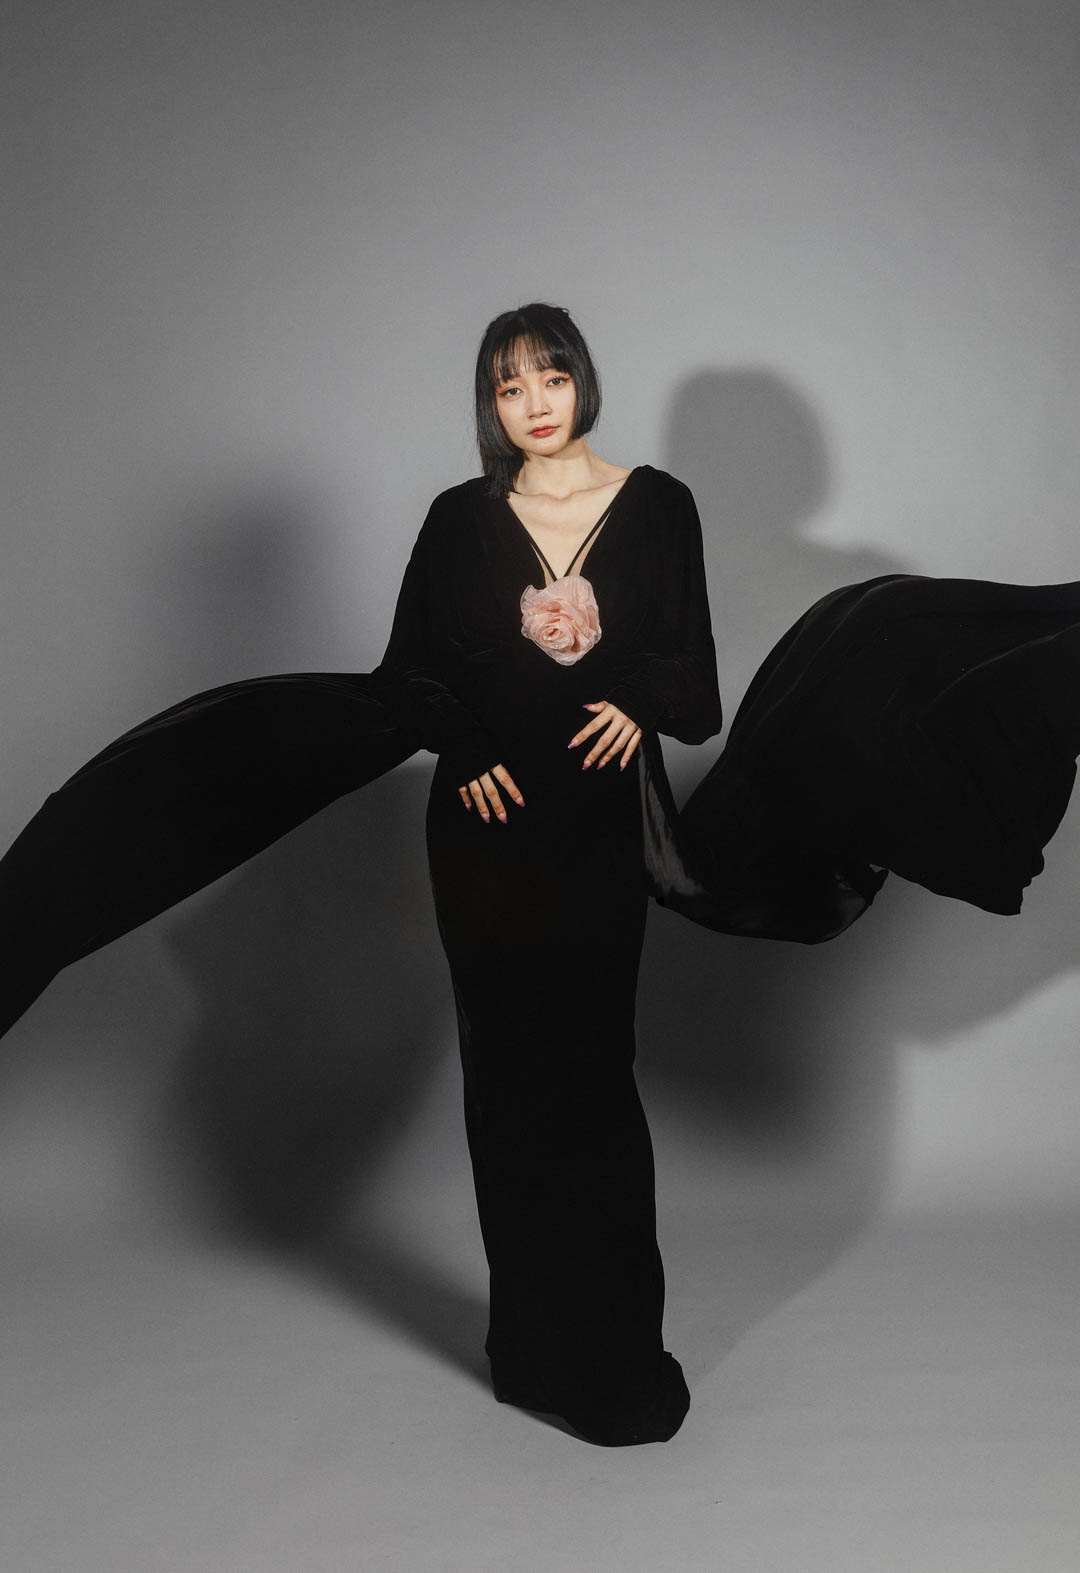 This black velvet dress features a V-shaped neckline and narrow straps on each shoulder for support. The dress is long, with a flowing train that drapes between the wearer's legs. The background in the image is gray.